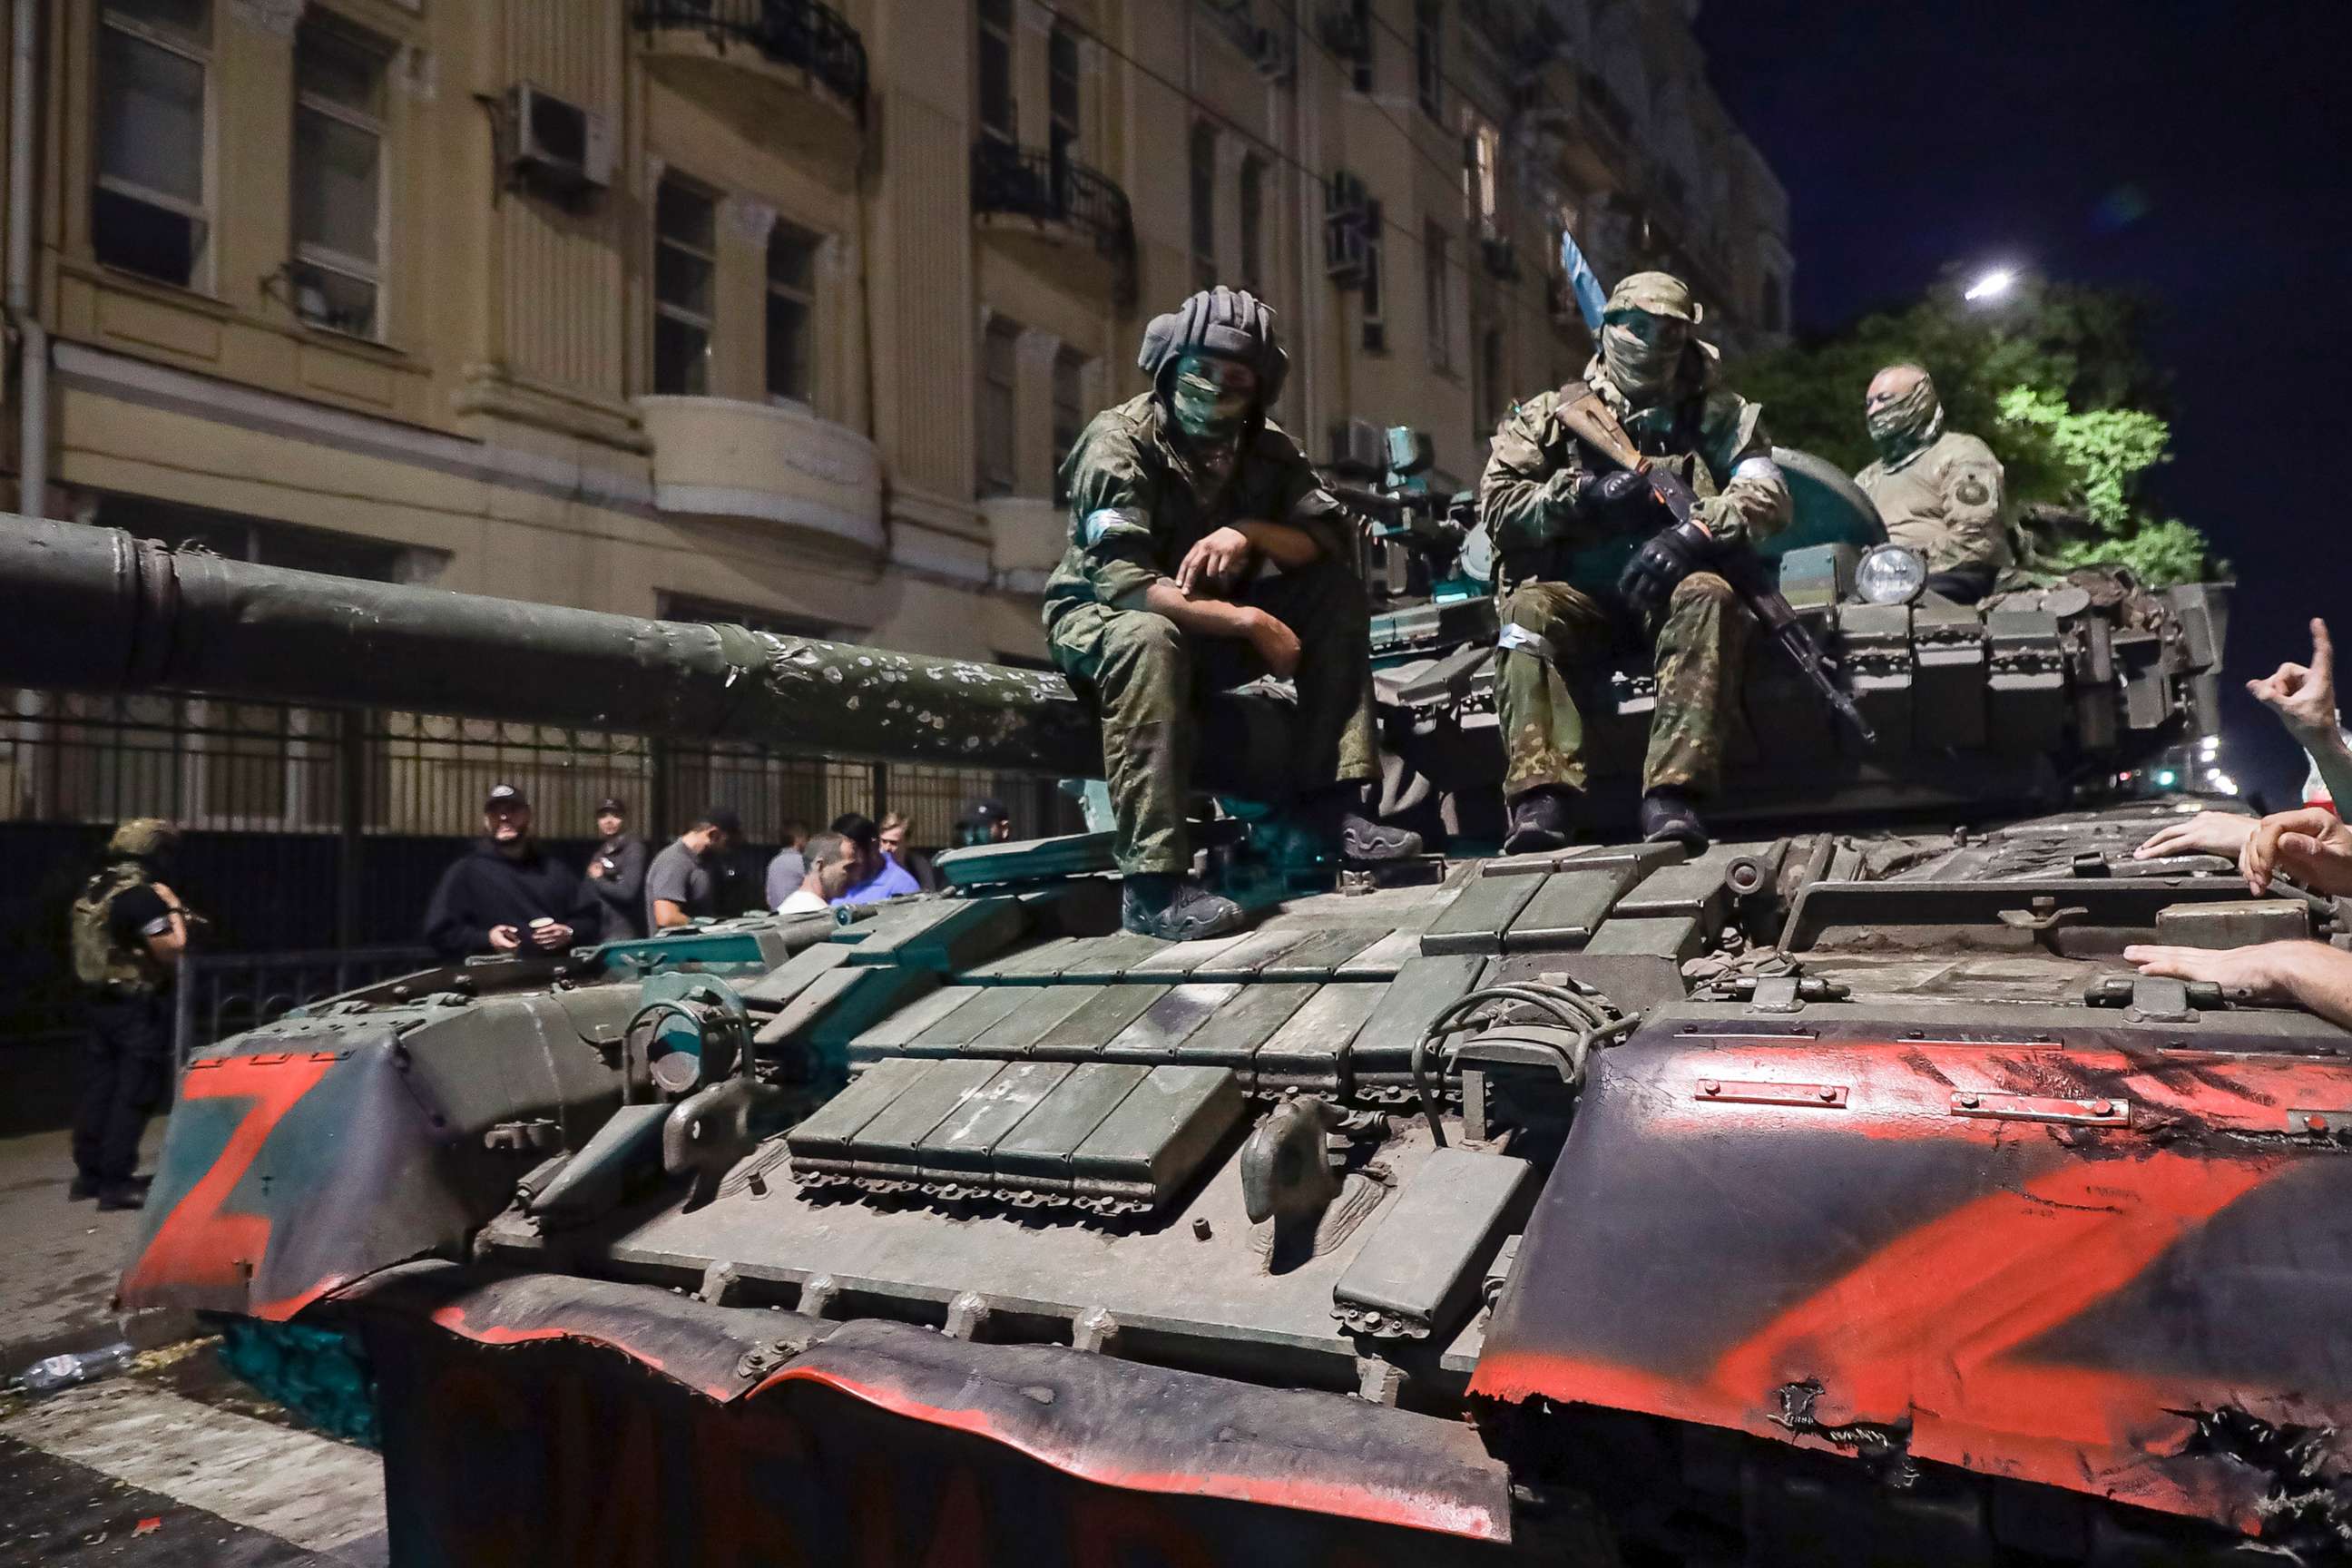 PHOTO: Members of the Wagner Group military company sit atop of a tank on a street in Rostov-on-Don, Russia, June 24, 2023, prior to leaving an area at the headquarters of the Southern Military District.